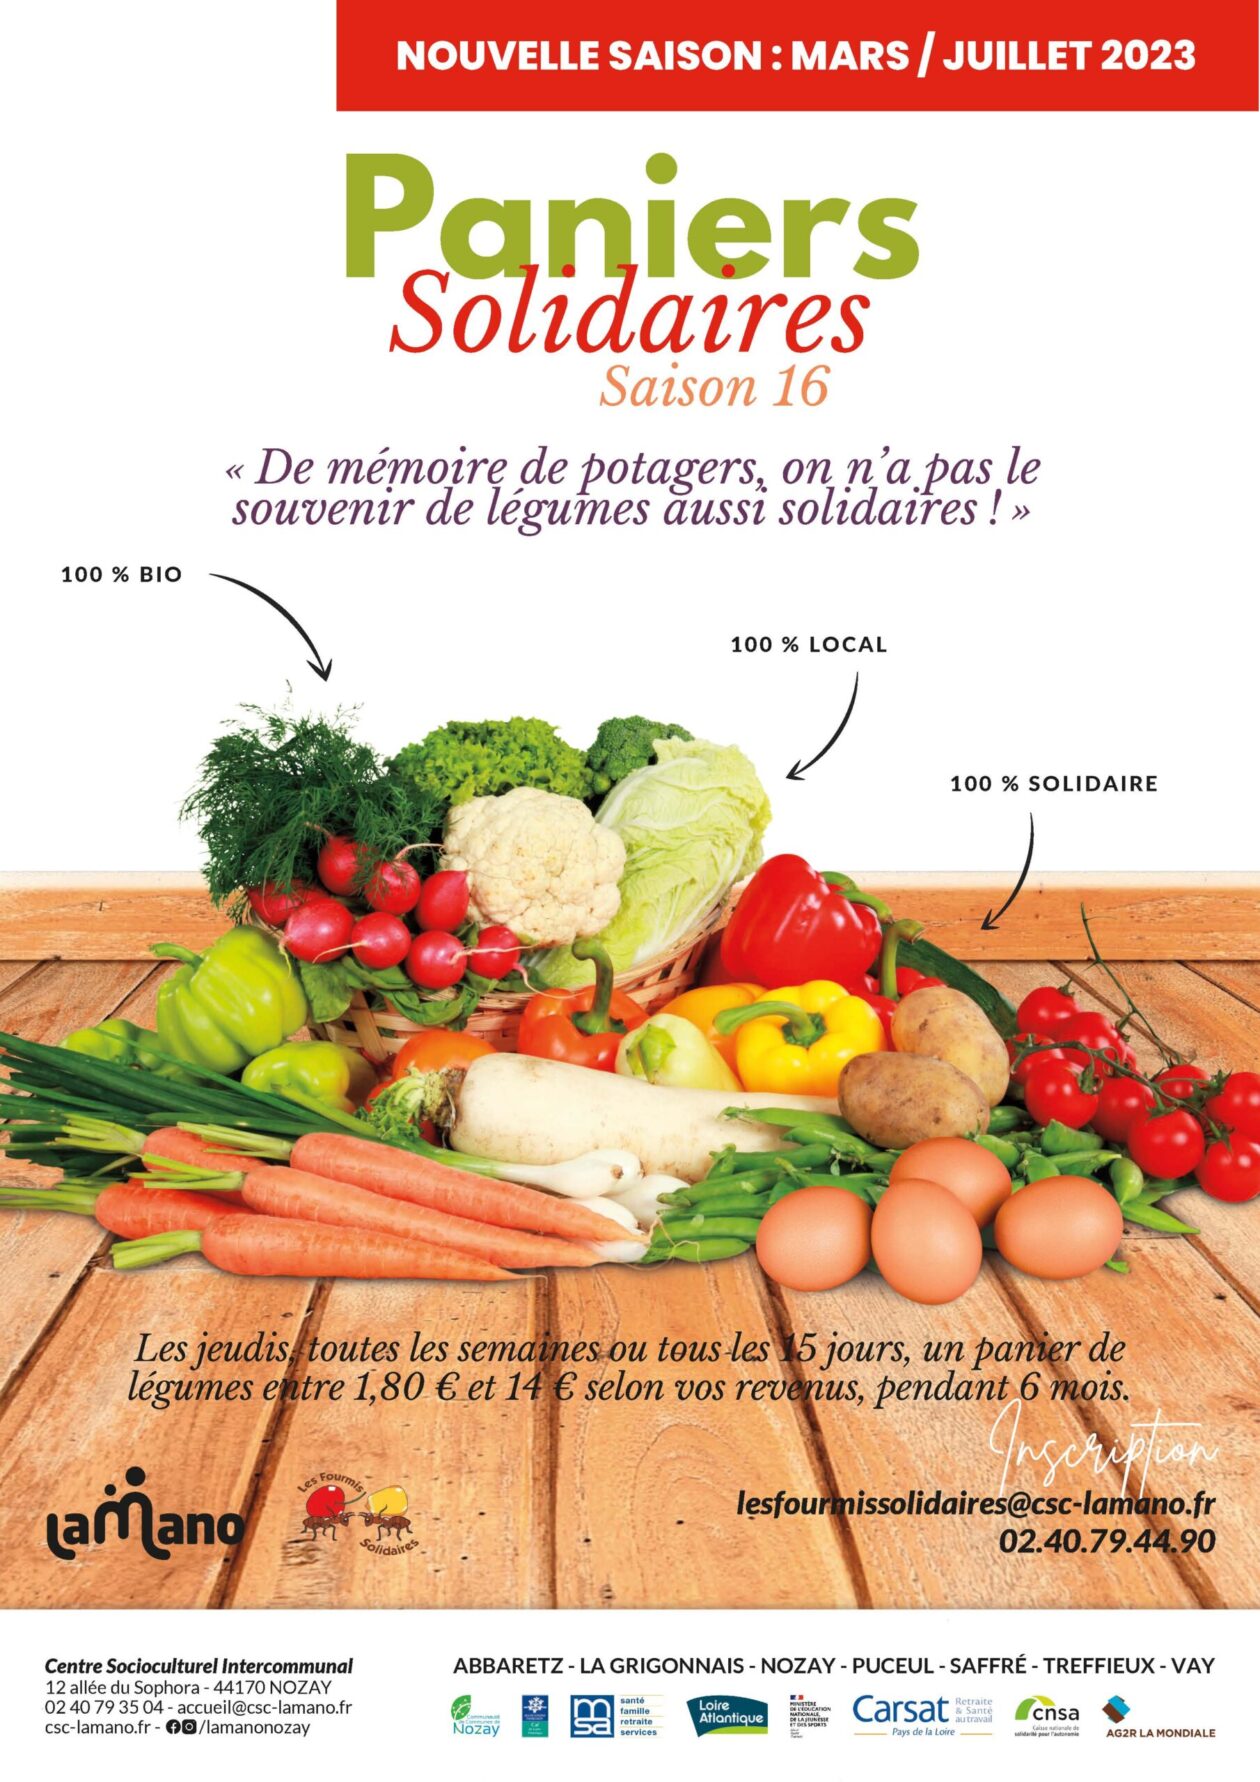 Paniers solidaires Saison 16 bd[2]_Page_4